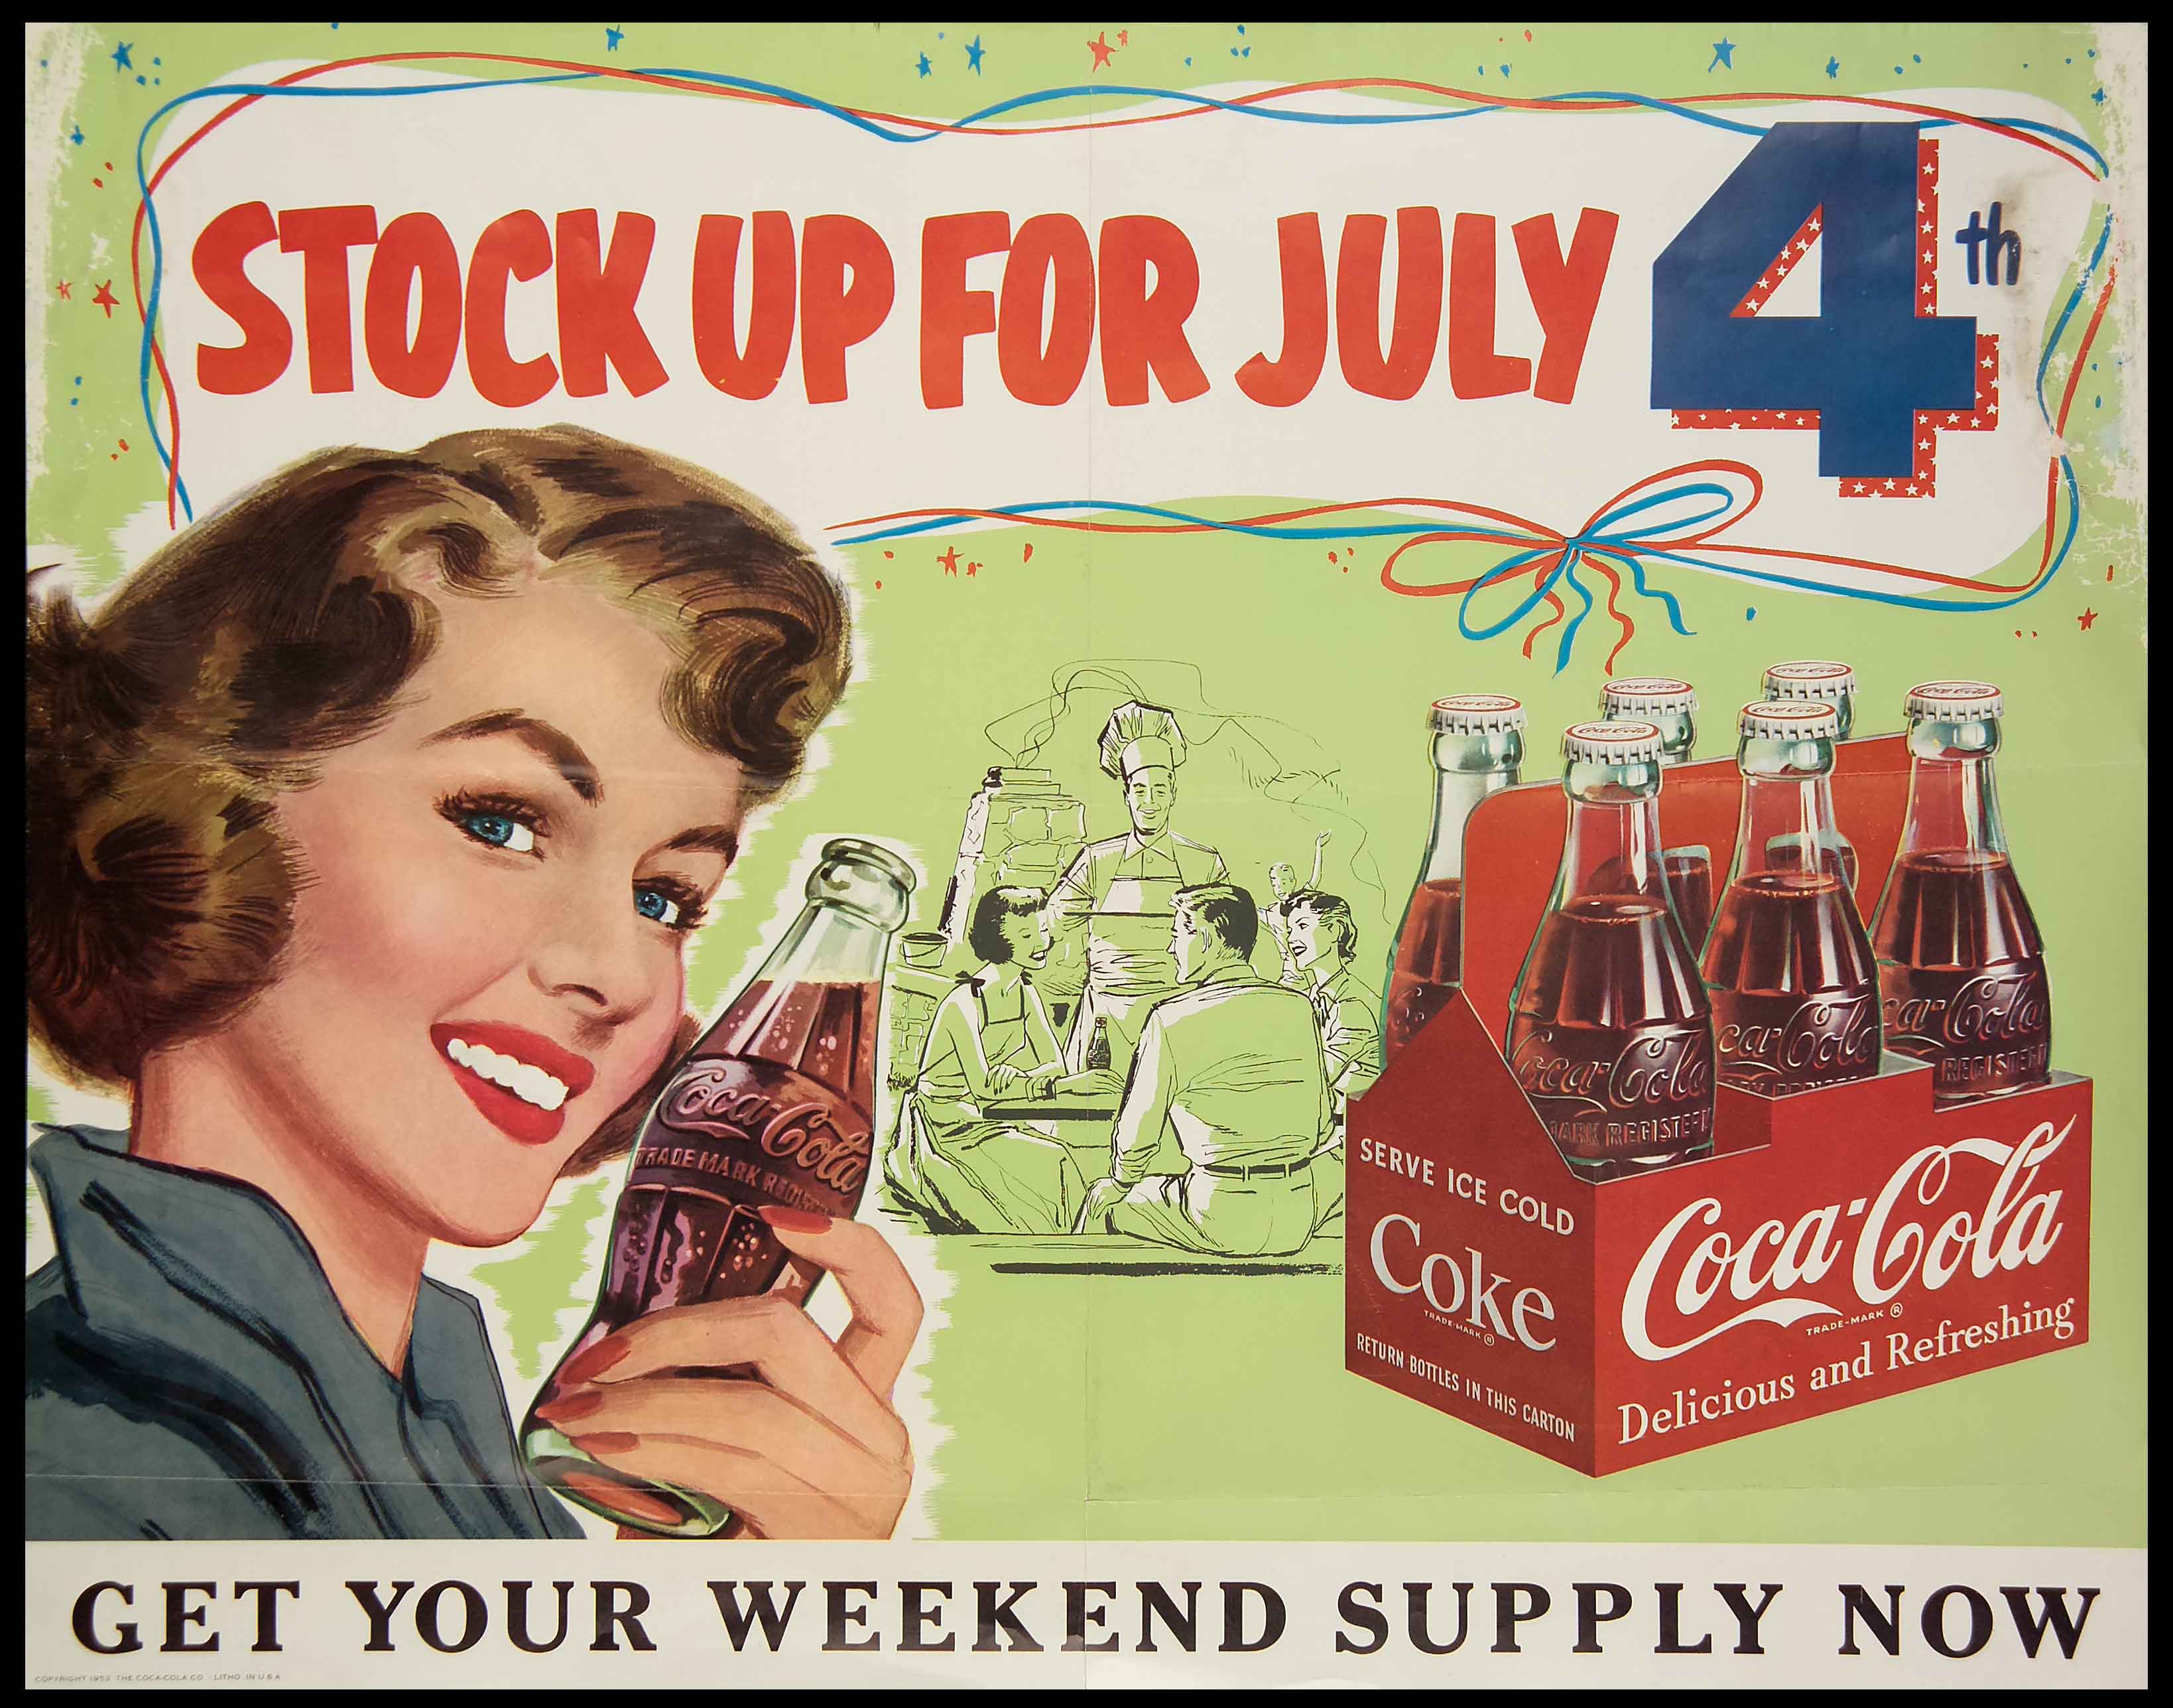 Holiday Photo From The Coca Cola Archives: The Coca Cola